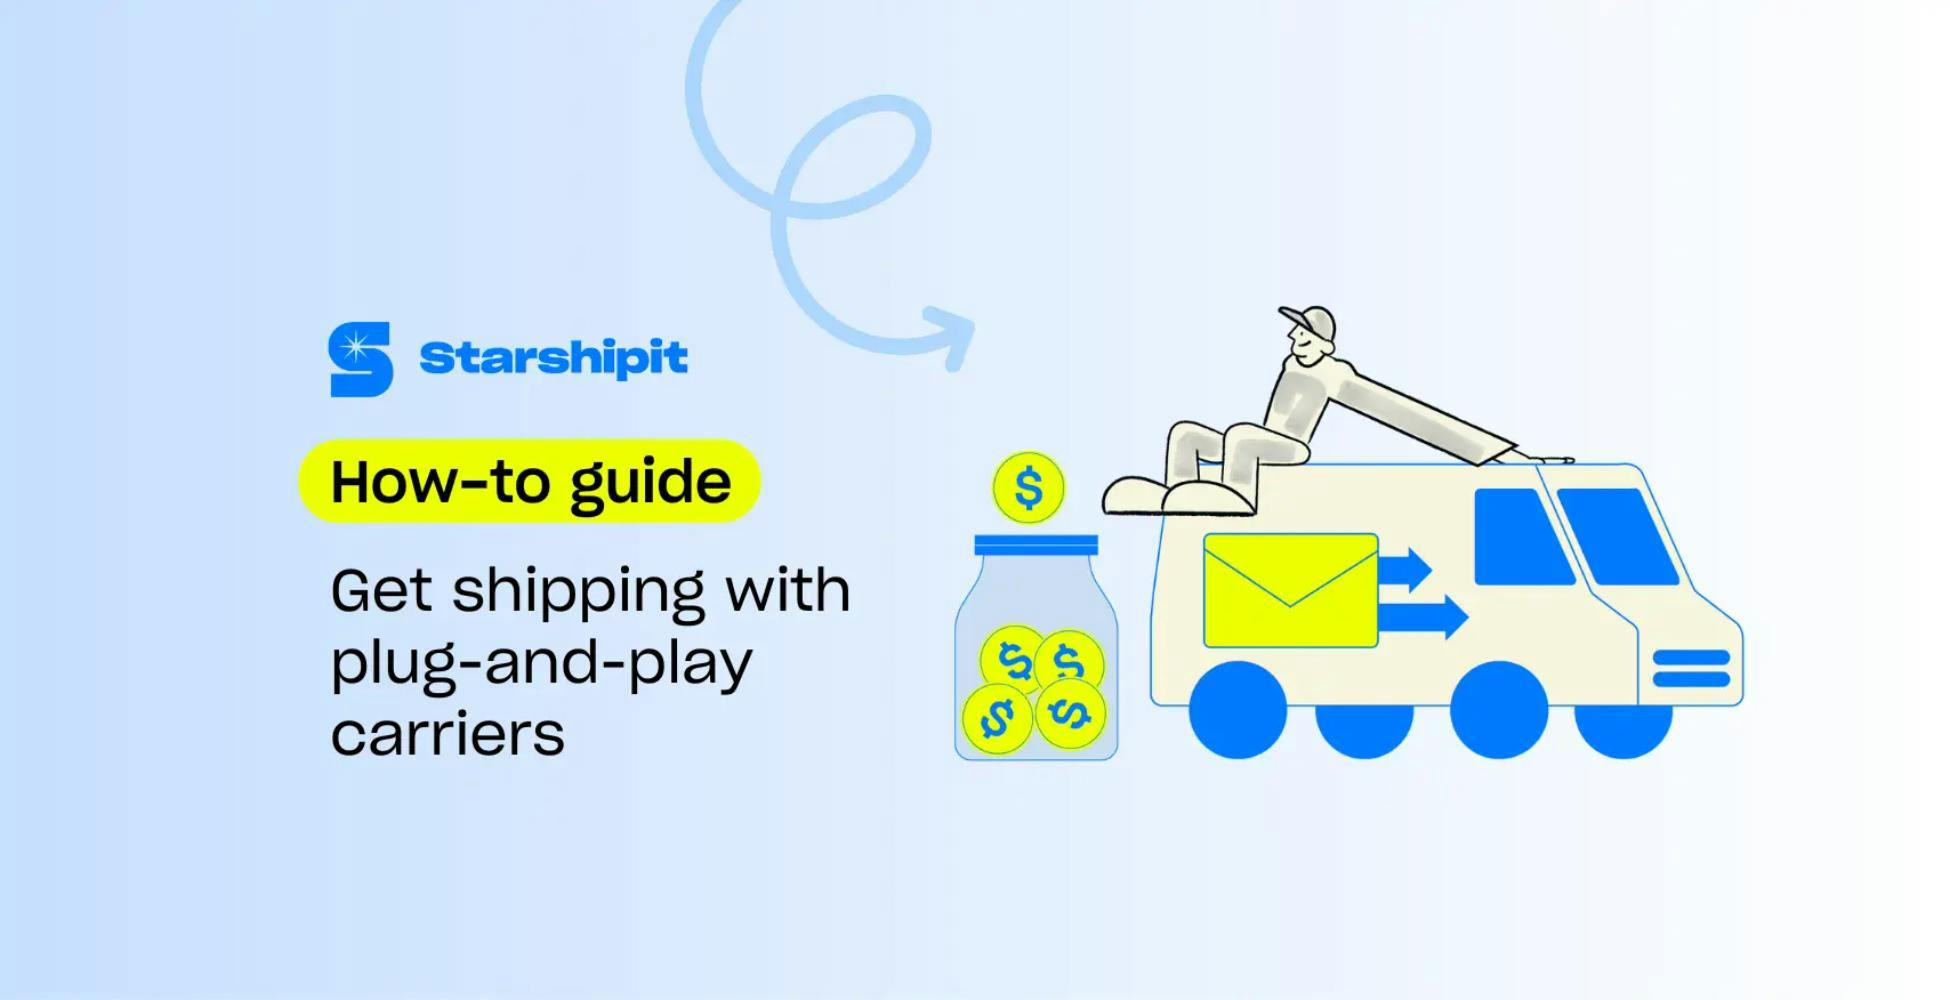 How to guide: Get shipping with plug-and-play carriers